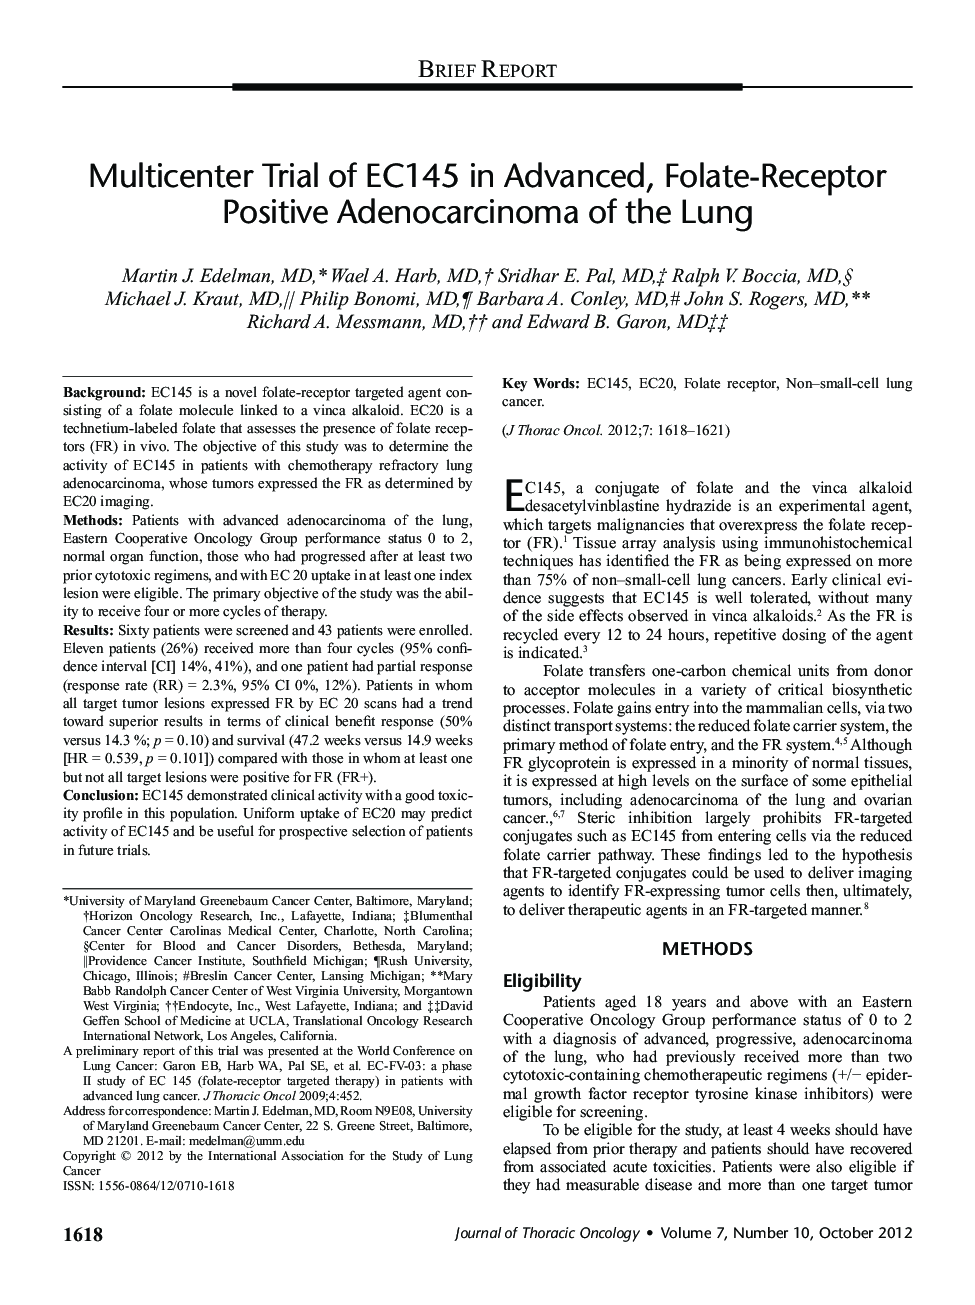 Multicenter Trial of EC145 in Advanced, Folate-Receptor Positive Adenocarcinoma of the Lung 